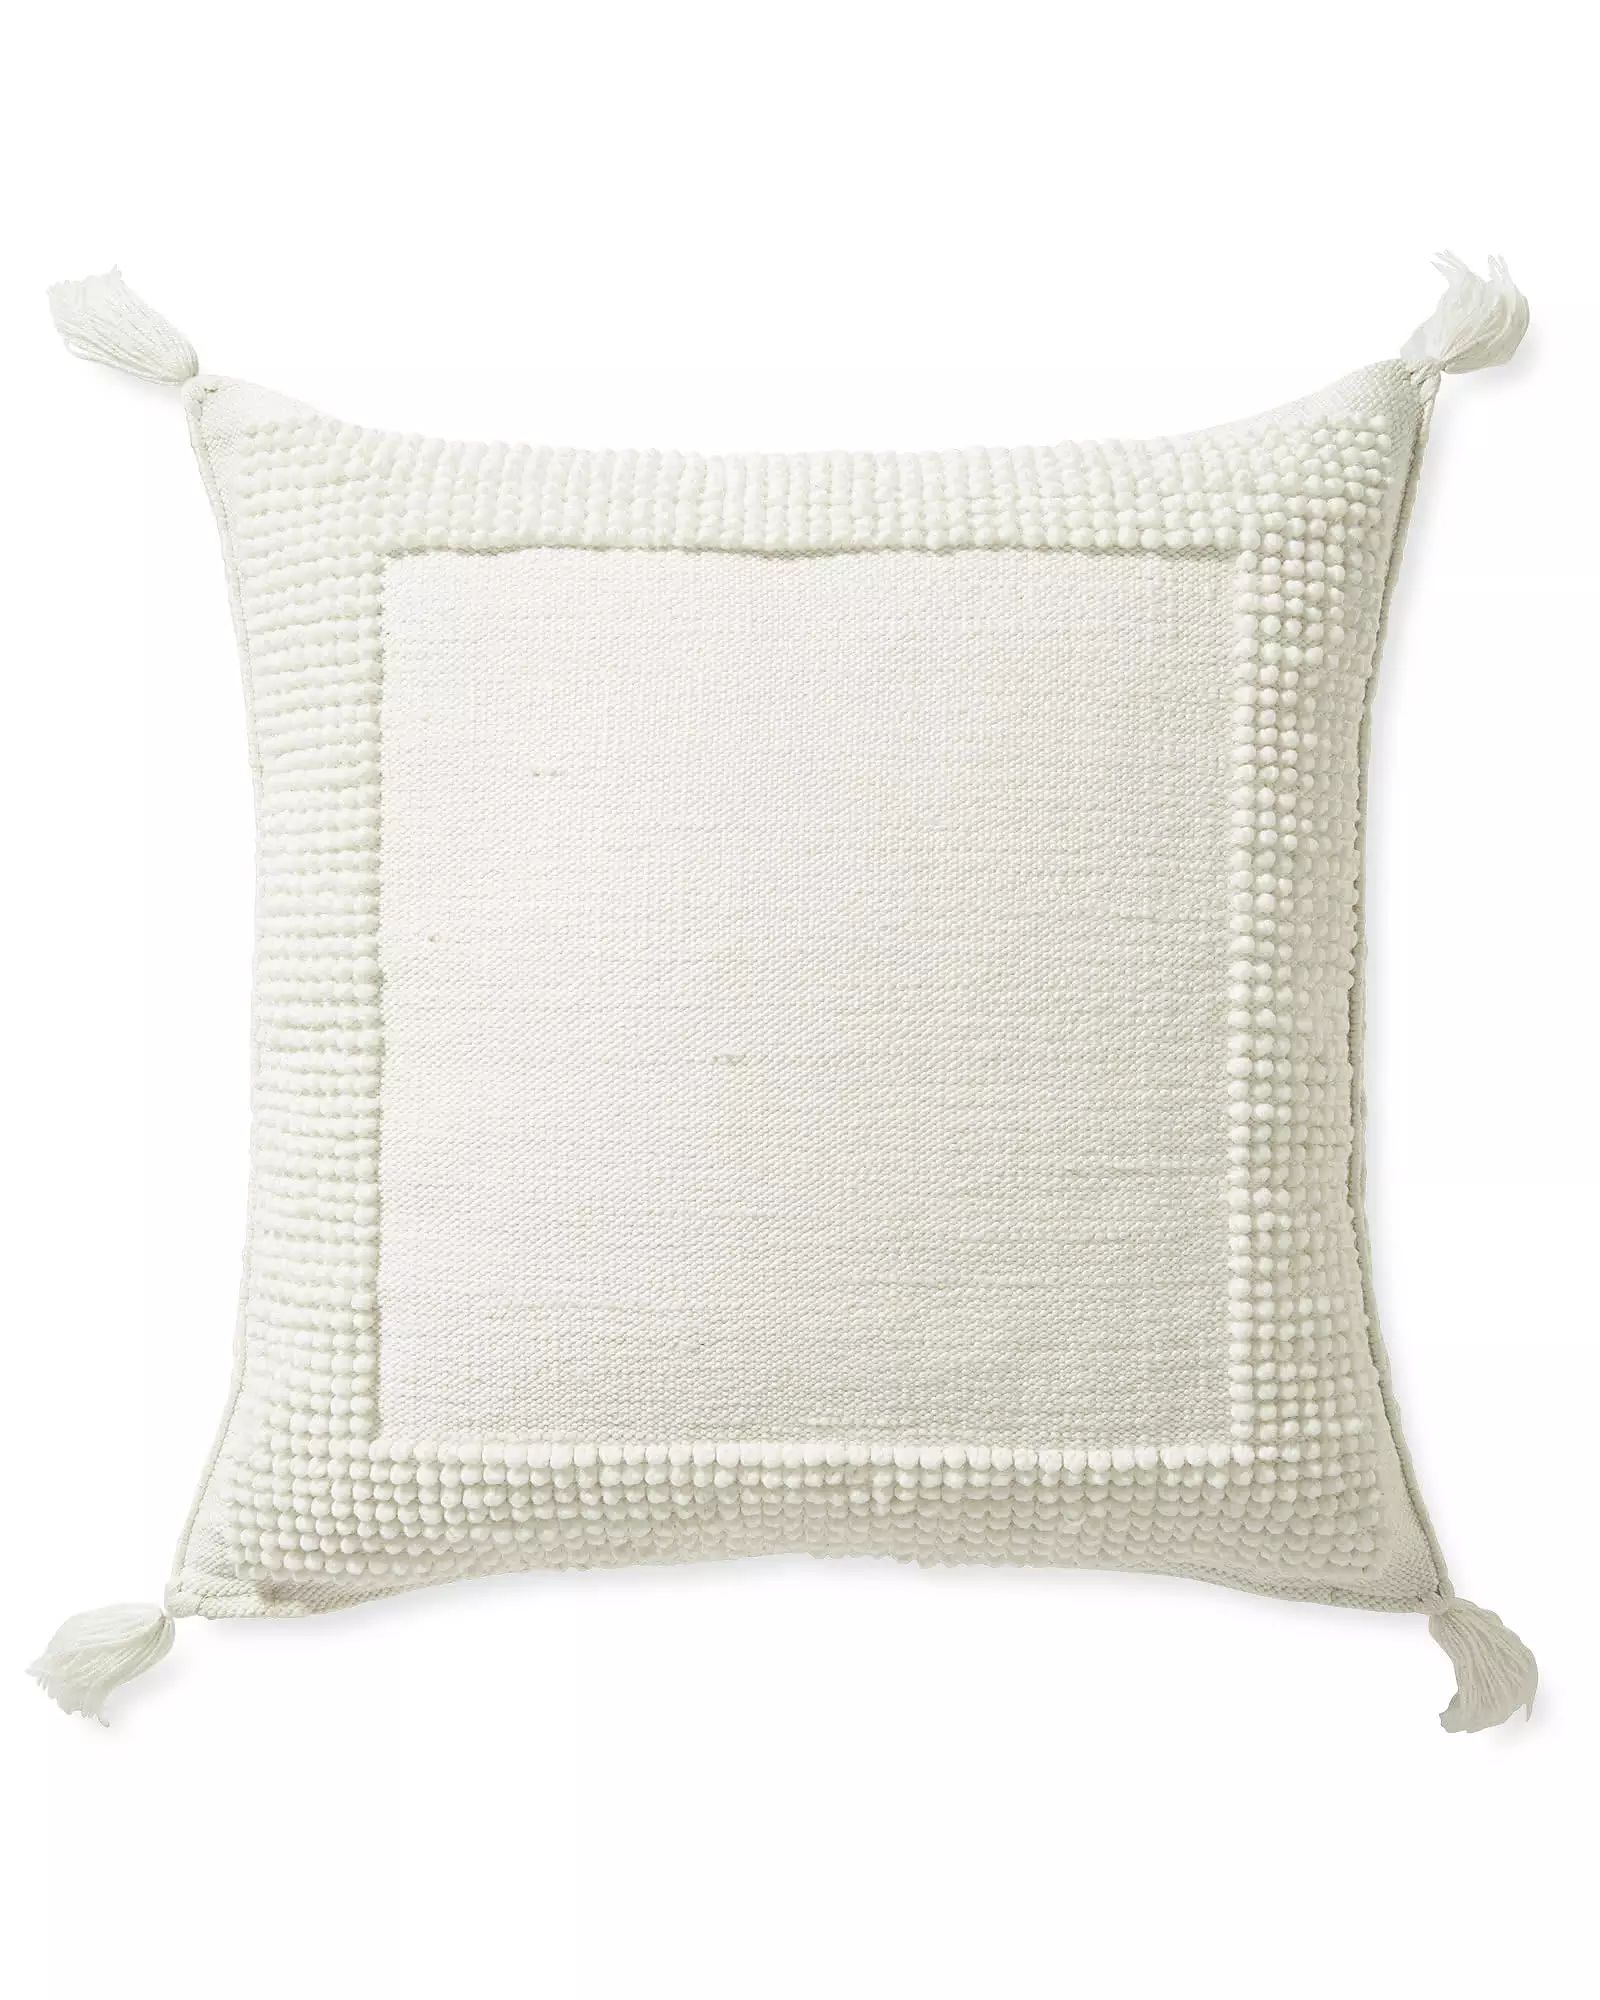 Montecito Floor Pillow | Serena and Lily